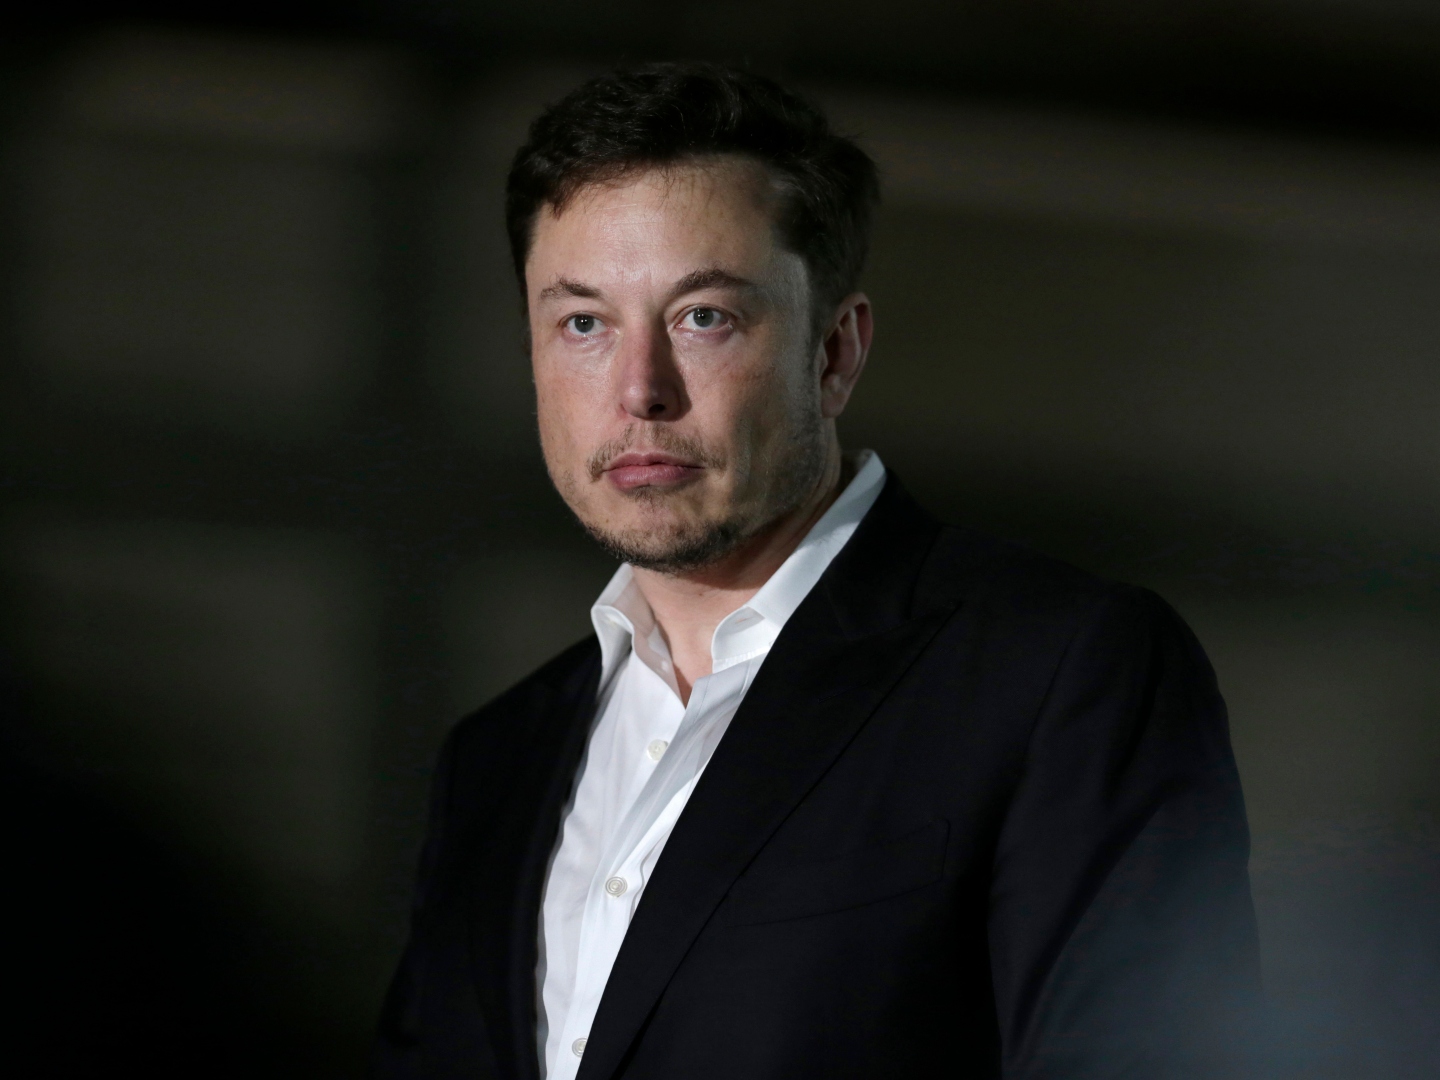 Elon Musk’s Mom Gushing Over Her Son on Twitter Comes at a Curious Time For the Billionaire